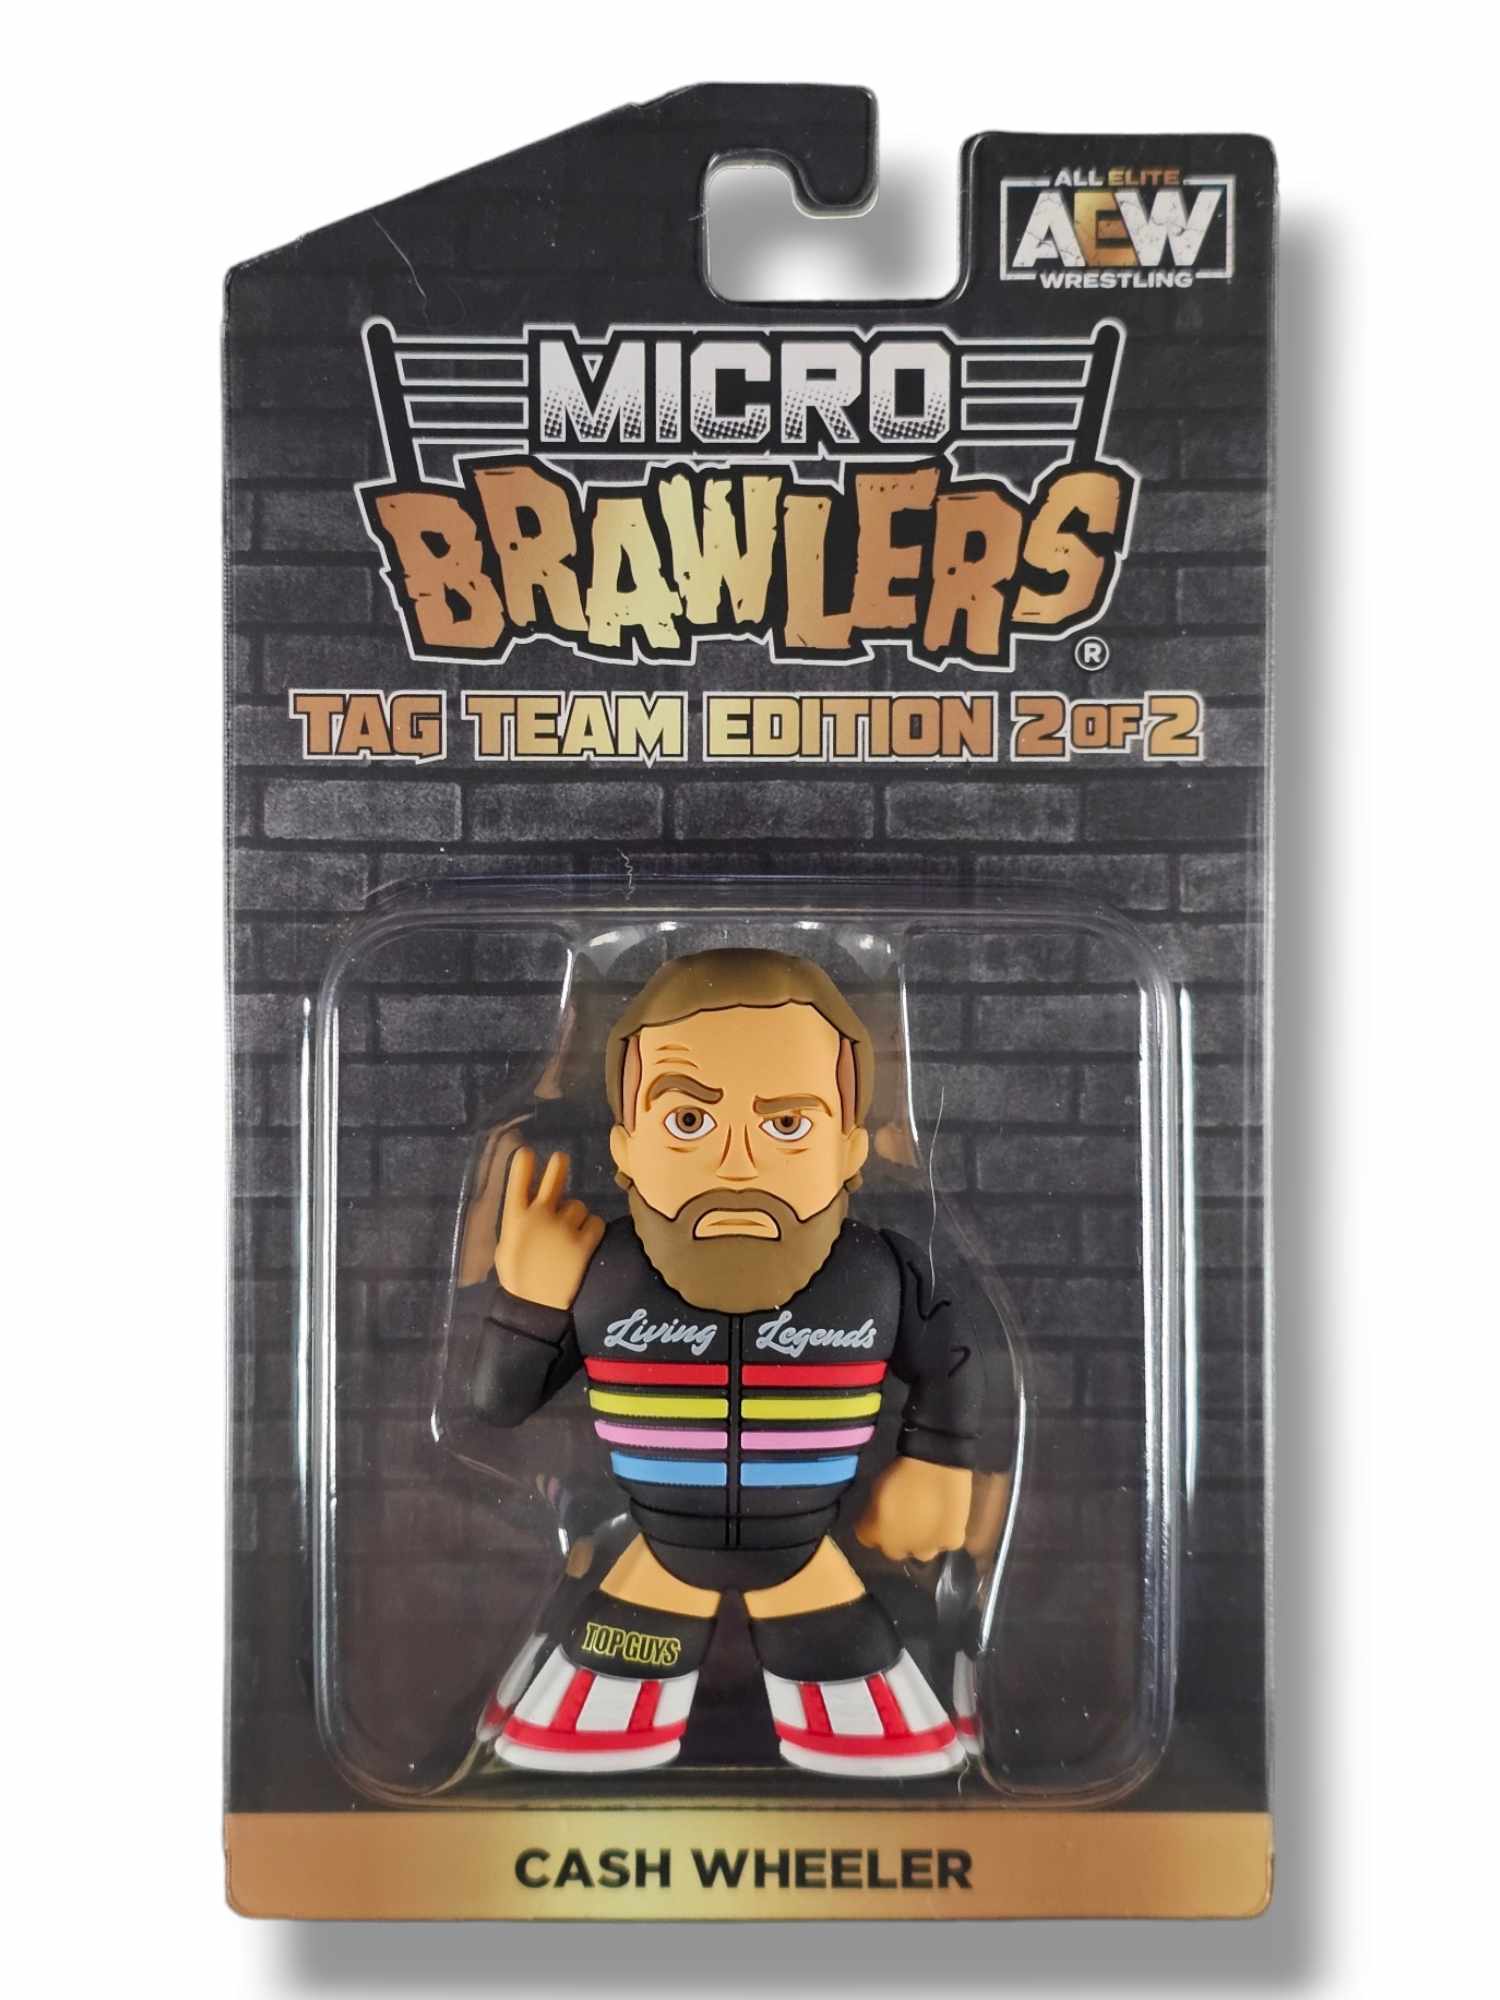 Pro Wrestling Tees - Mystery Micro Brawler Grab Bags now available at  ProWrestlingTees.com for a limited time. You can get them for as low as  $4.40 per figure. Fans have been asking